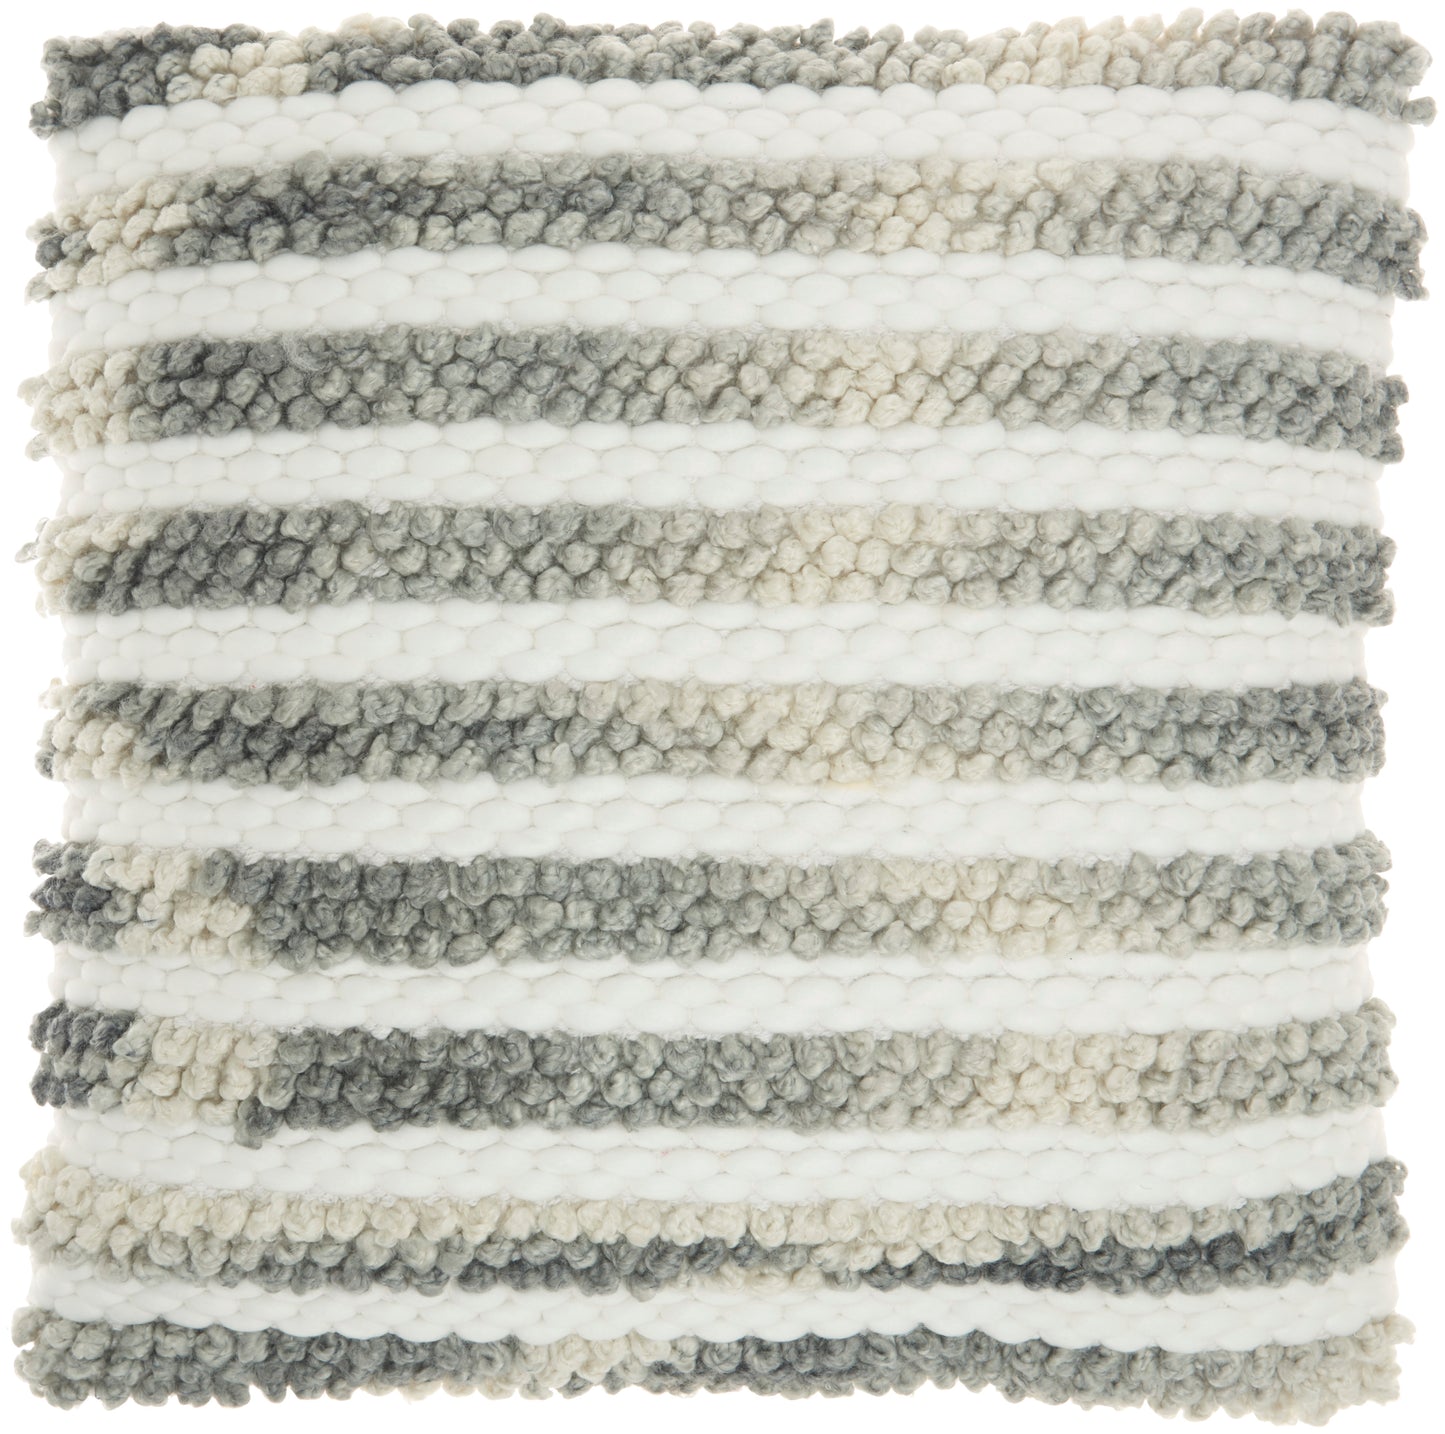 Life Styles DC308 Synthetic Blend Ombre Woven Stripes Throw Pillow From Mina Victory By Nourison Rugs